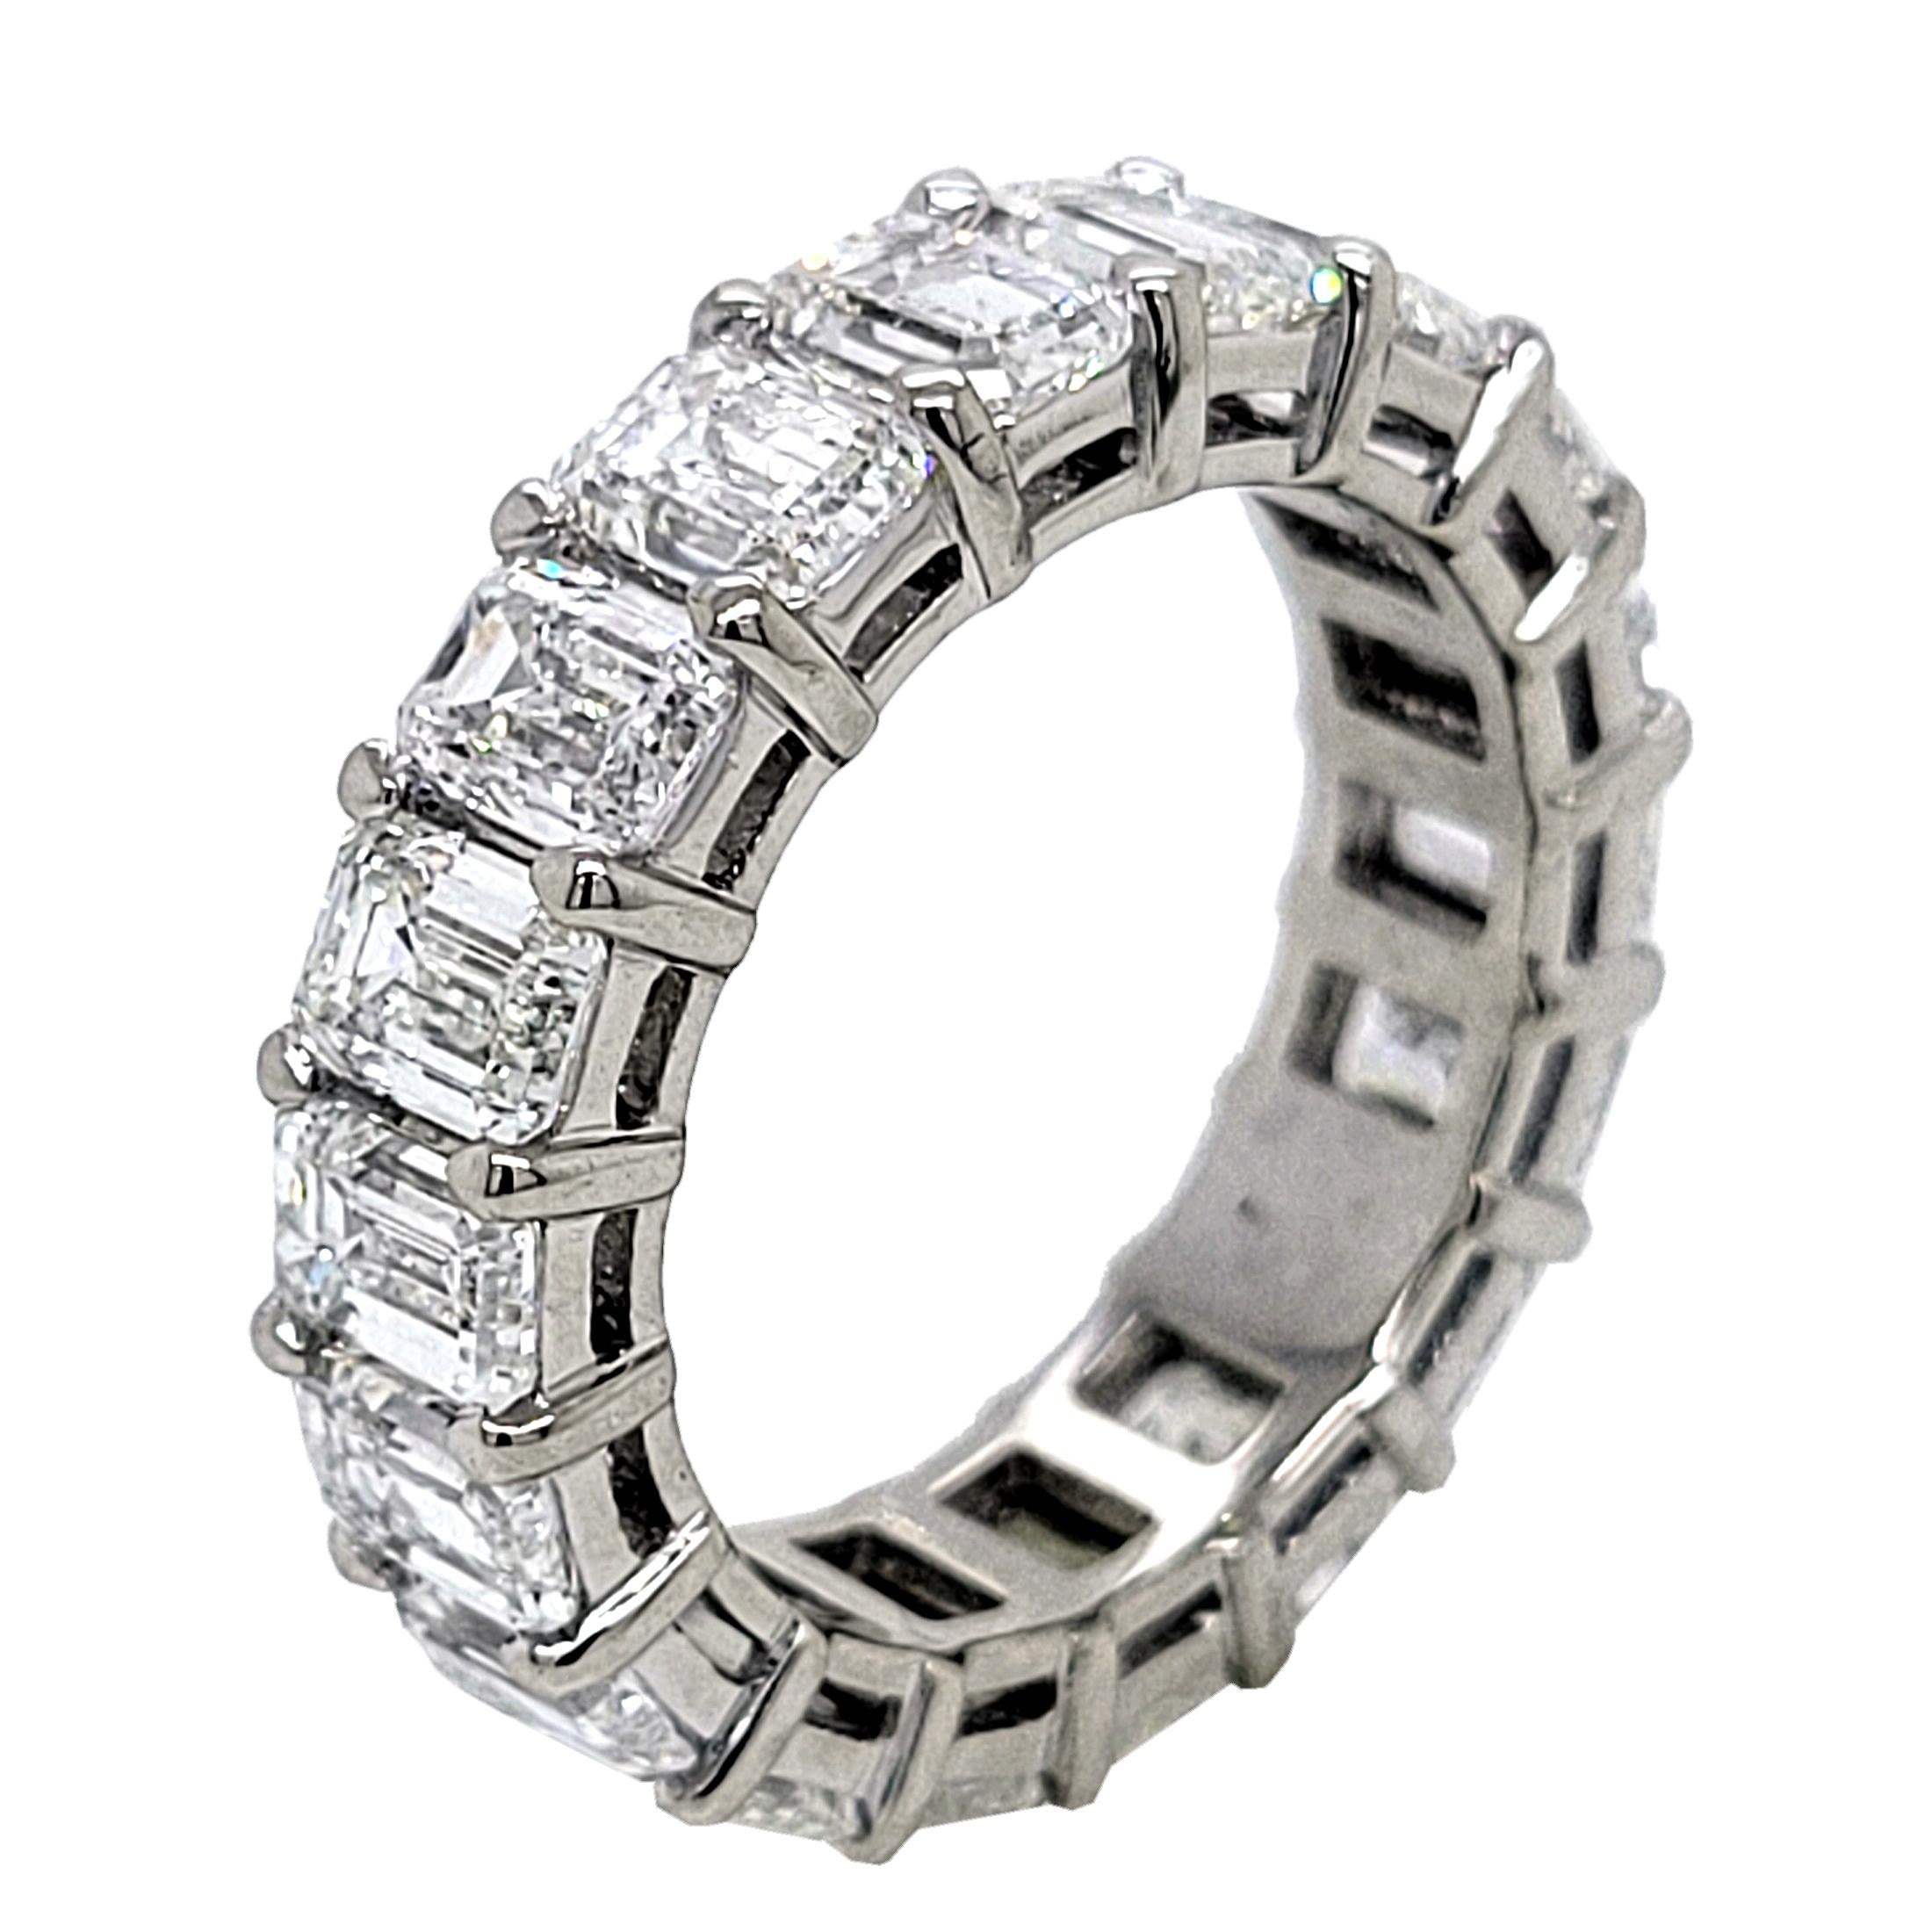 Women's GIA Certified 7.24 Carat '0.40 Cts' Emerald Cut Platinum Diamond Eternity Ring For Sale